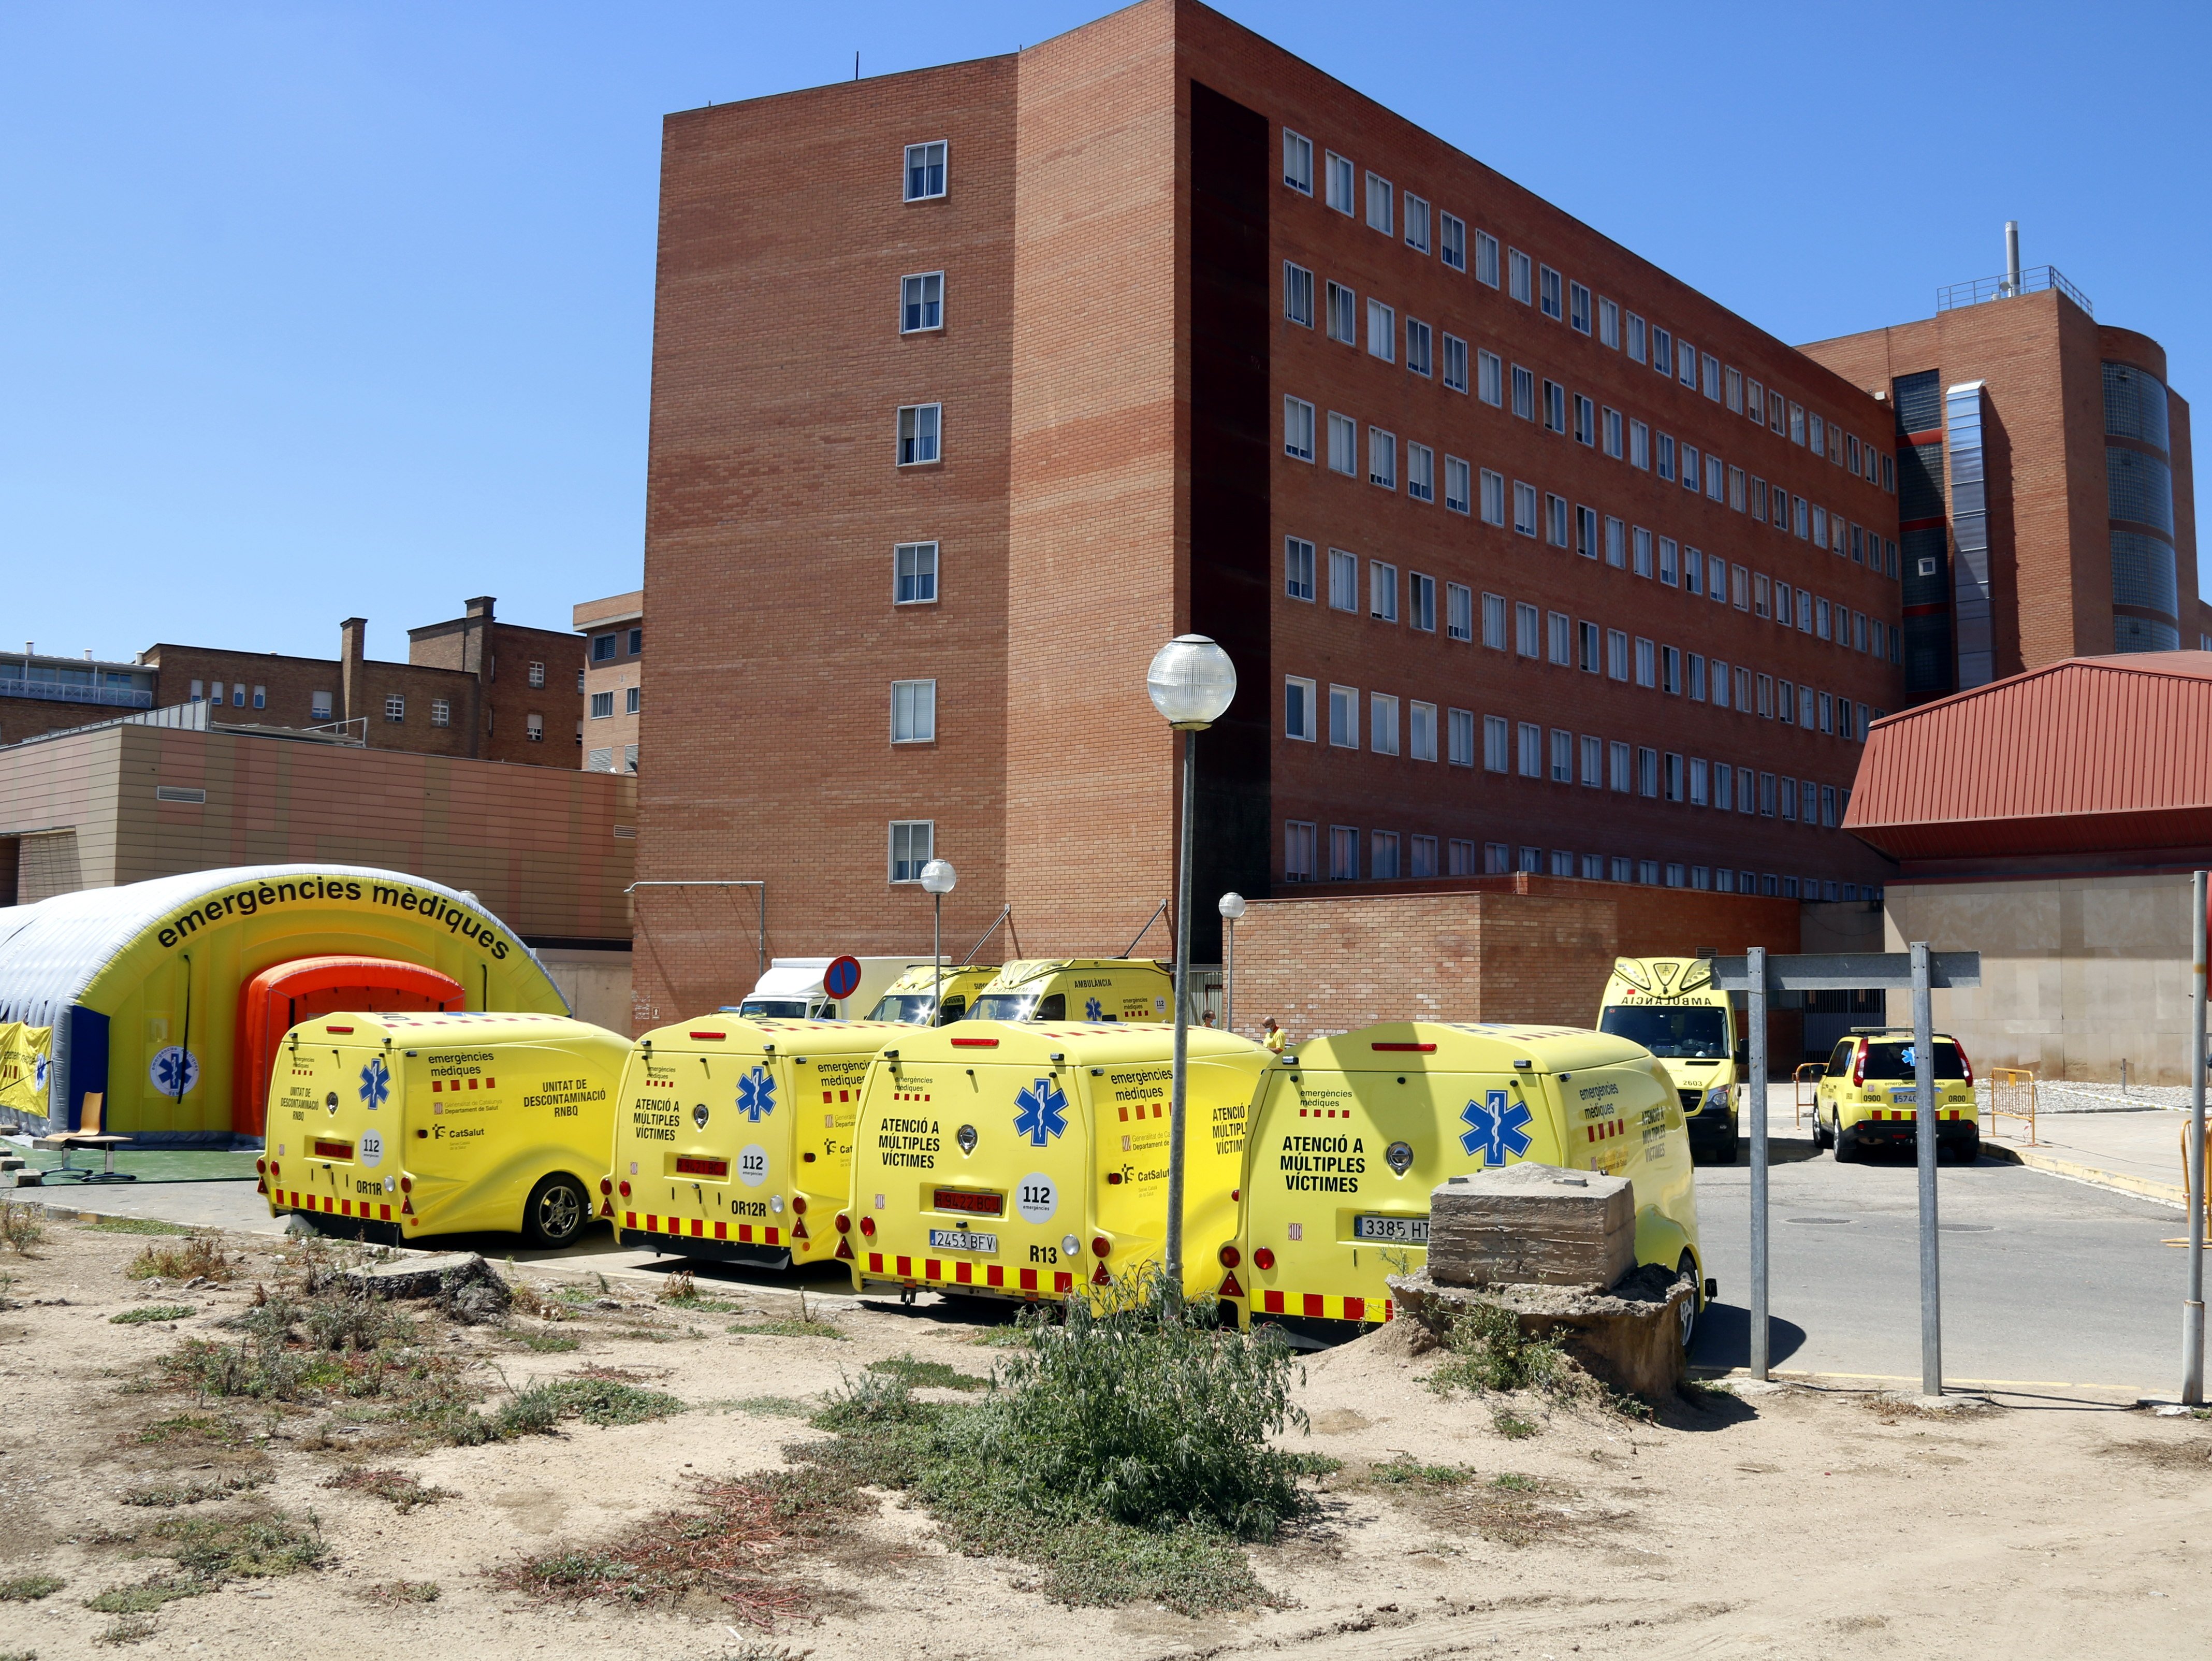 New Covid-19 outbreaks in Lleida: "This depends on all of us," says Vergés